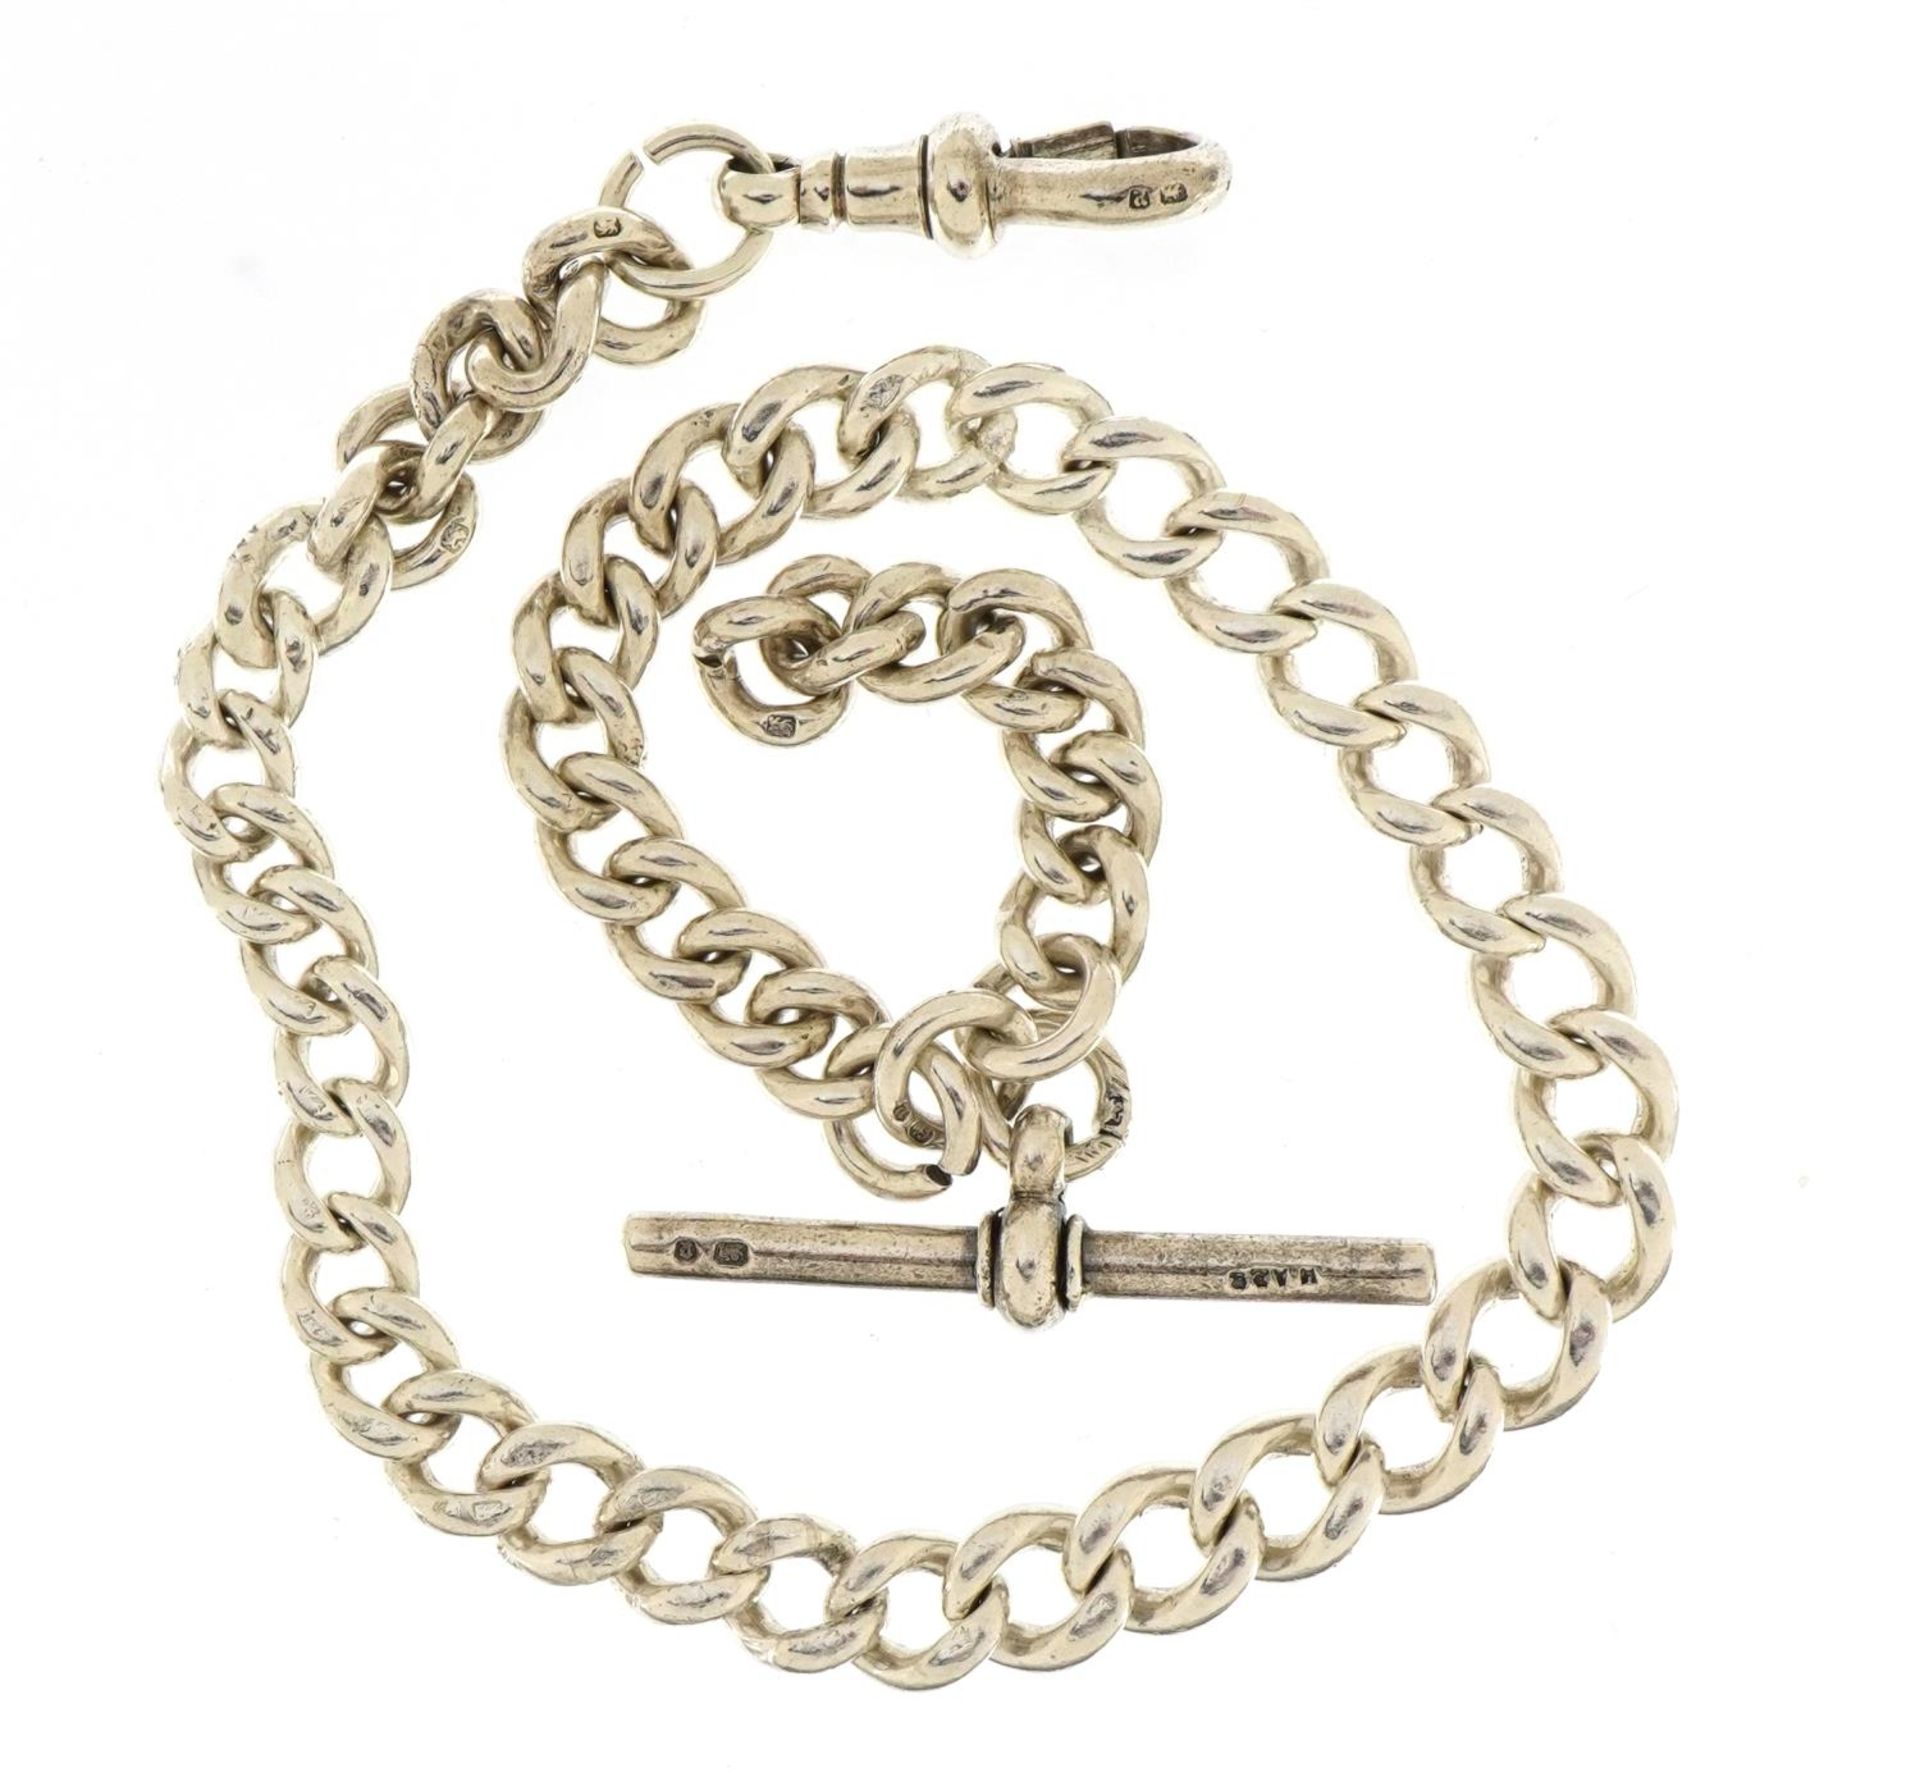 Silver watch chain with T bar and clasp, 29.5cm in length, 37.5g - Image 2 of 3